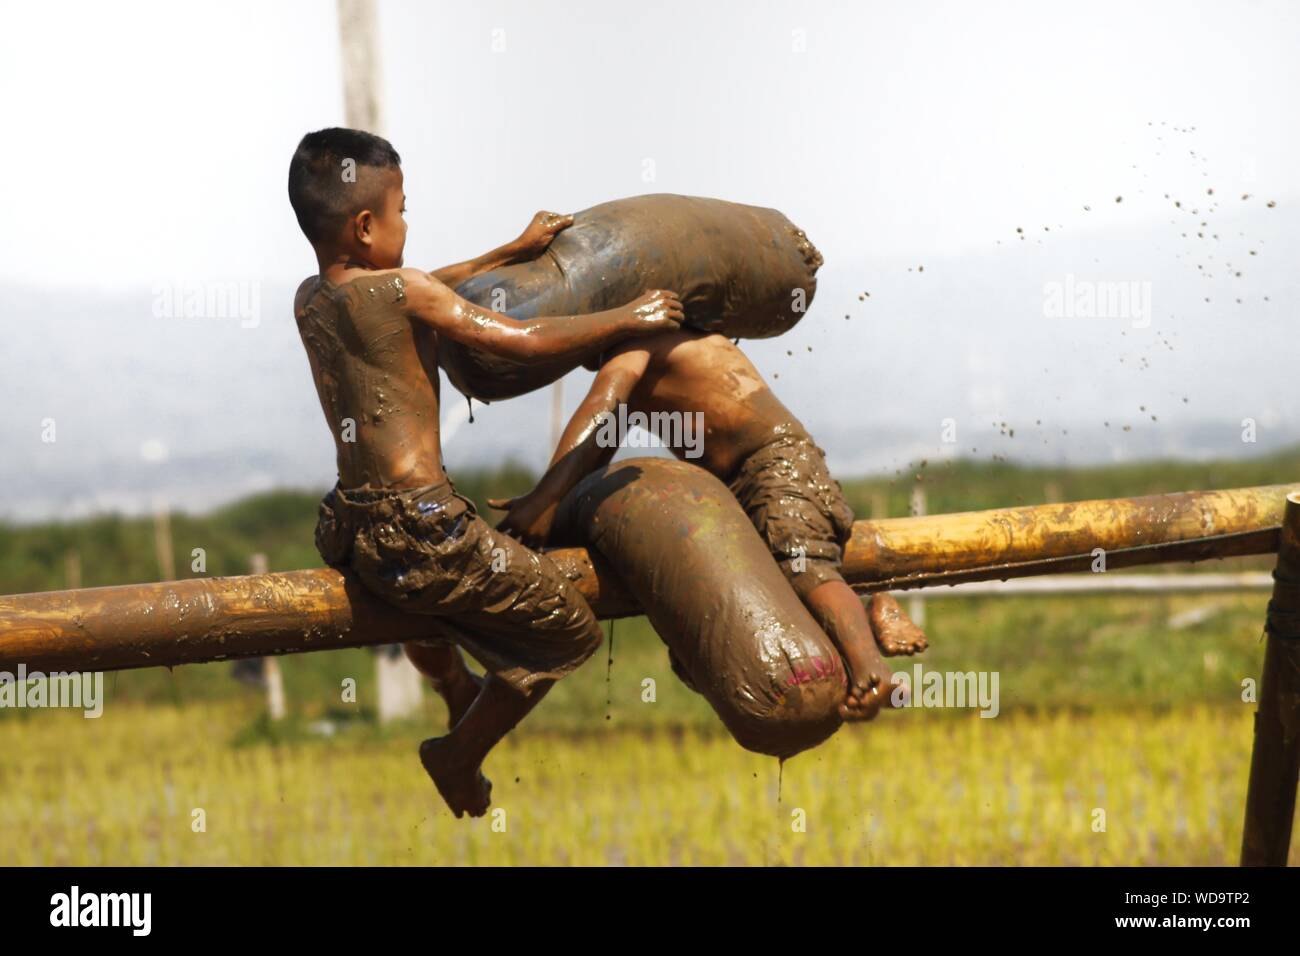 Messy Shirtless Boys Fighting While Sitting On Bamboo Against Sky Stock Photo Alamy Your alamy stock images are ready. https www alamy com messy shirtless boys fighting while sitting on bamboo against sky image266363050 html